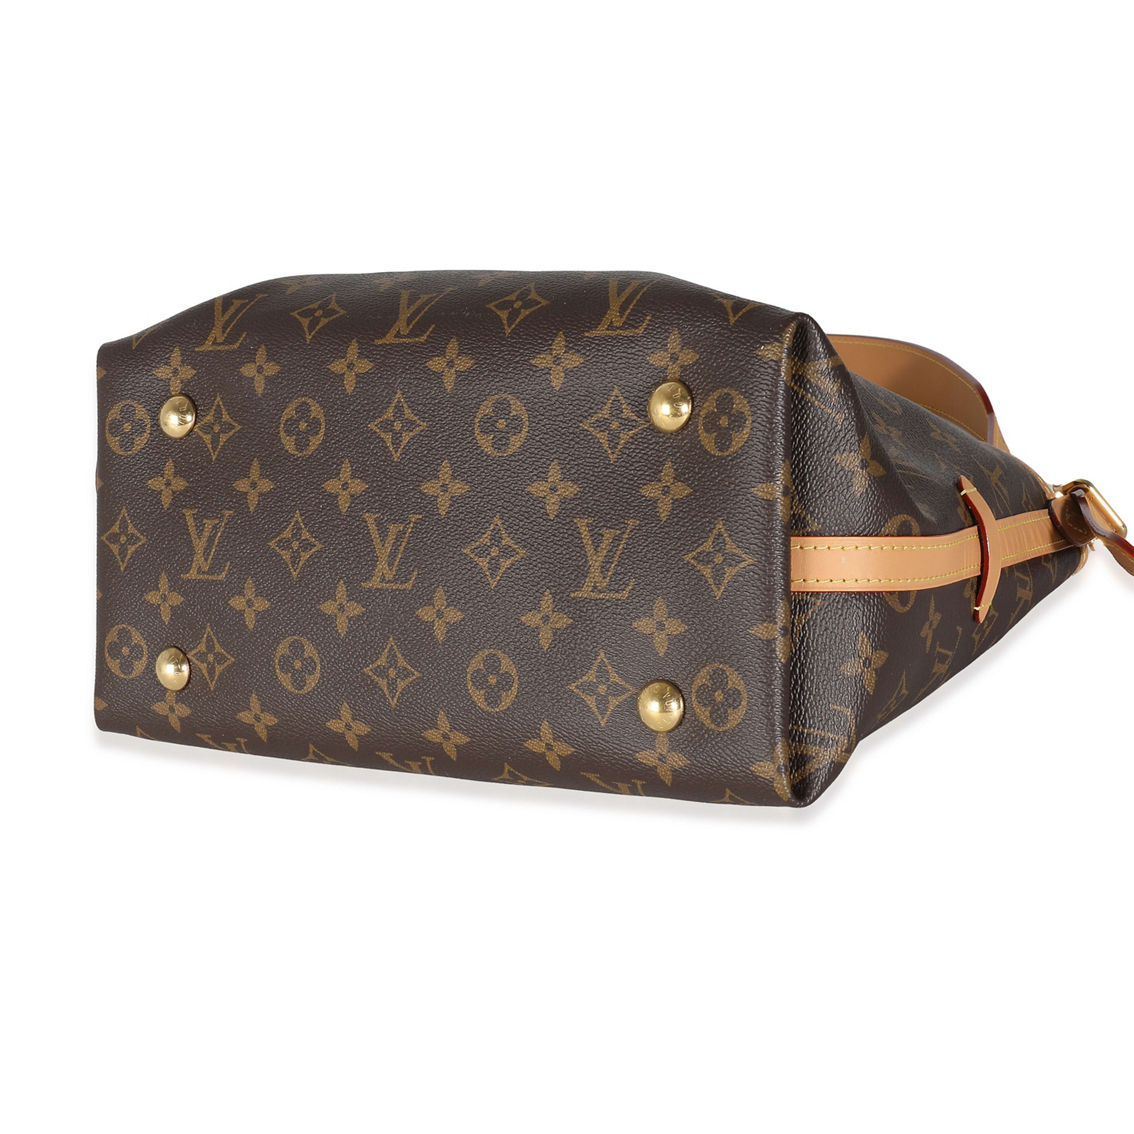 Louis Vuitton CarryAll PM Pre-Owned - Image 5 of 5